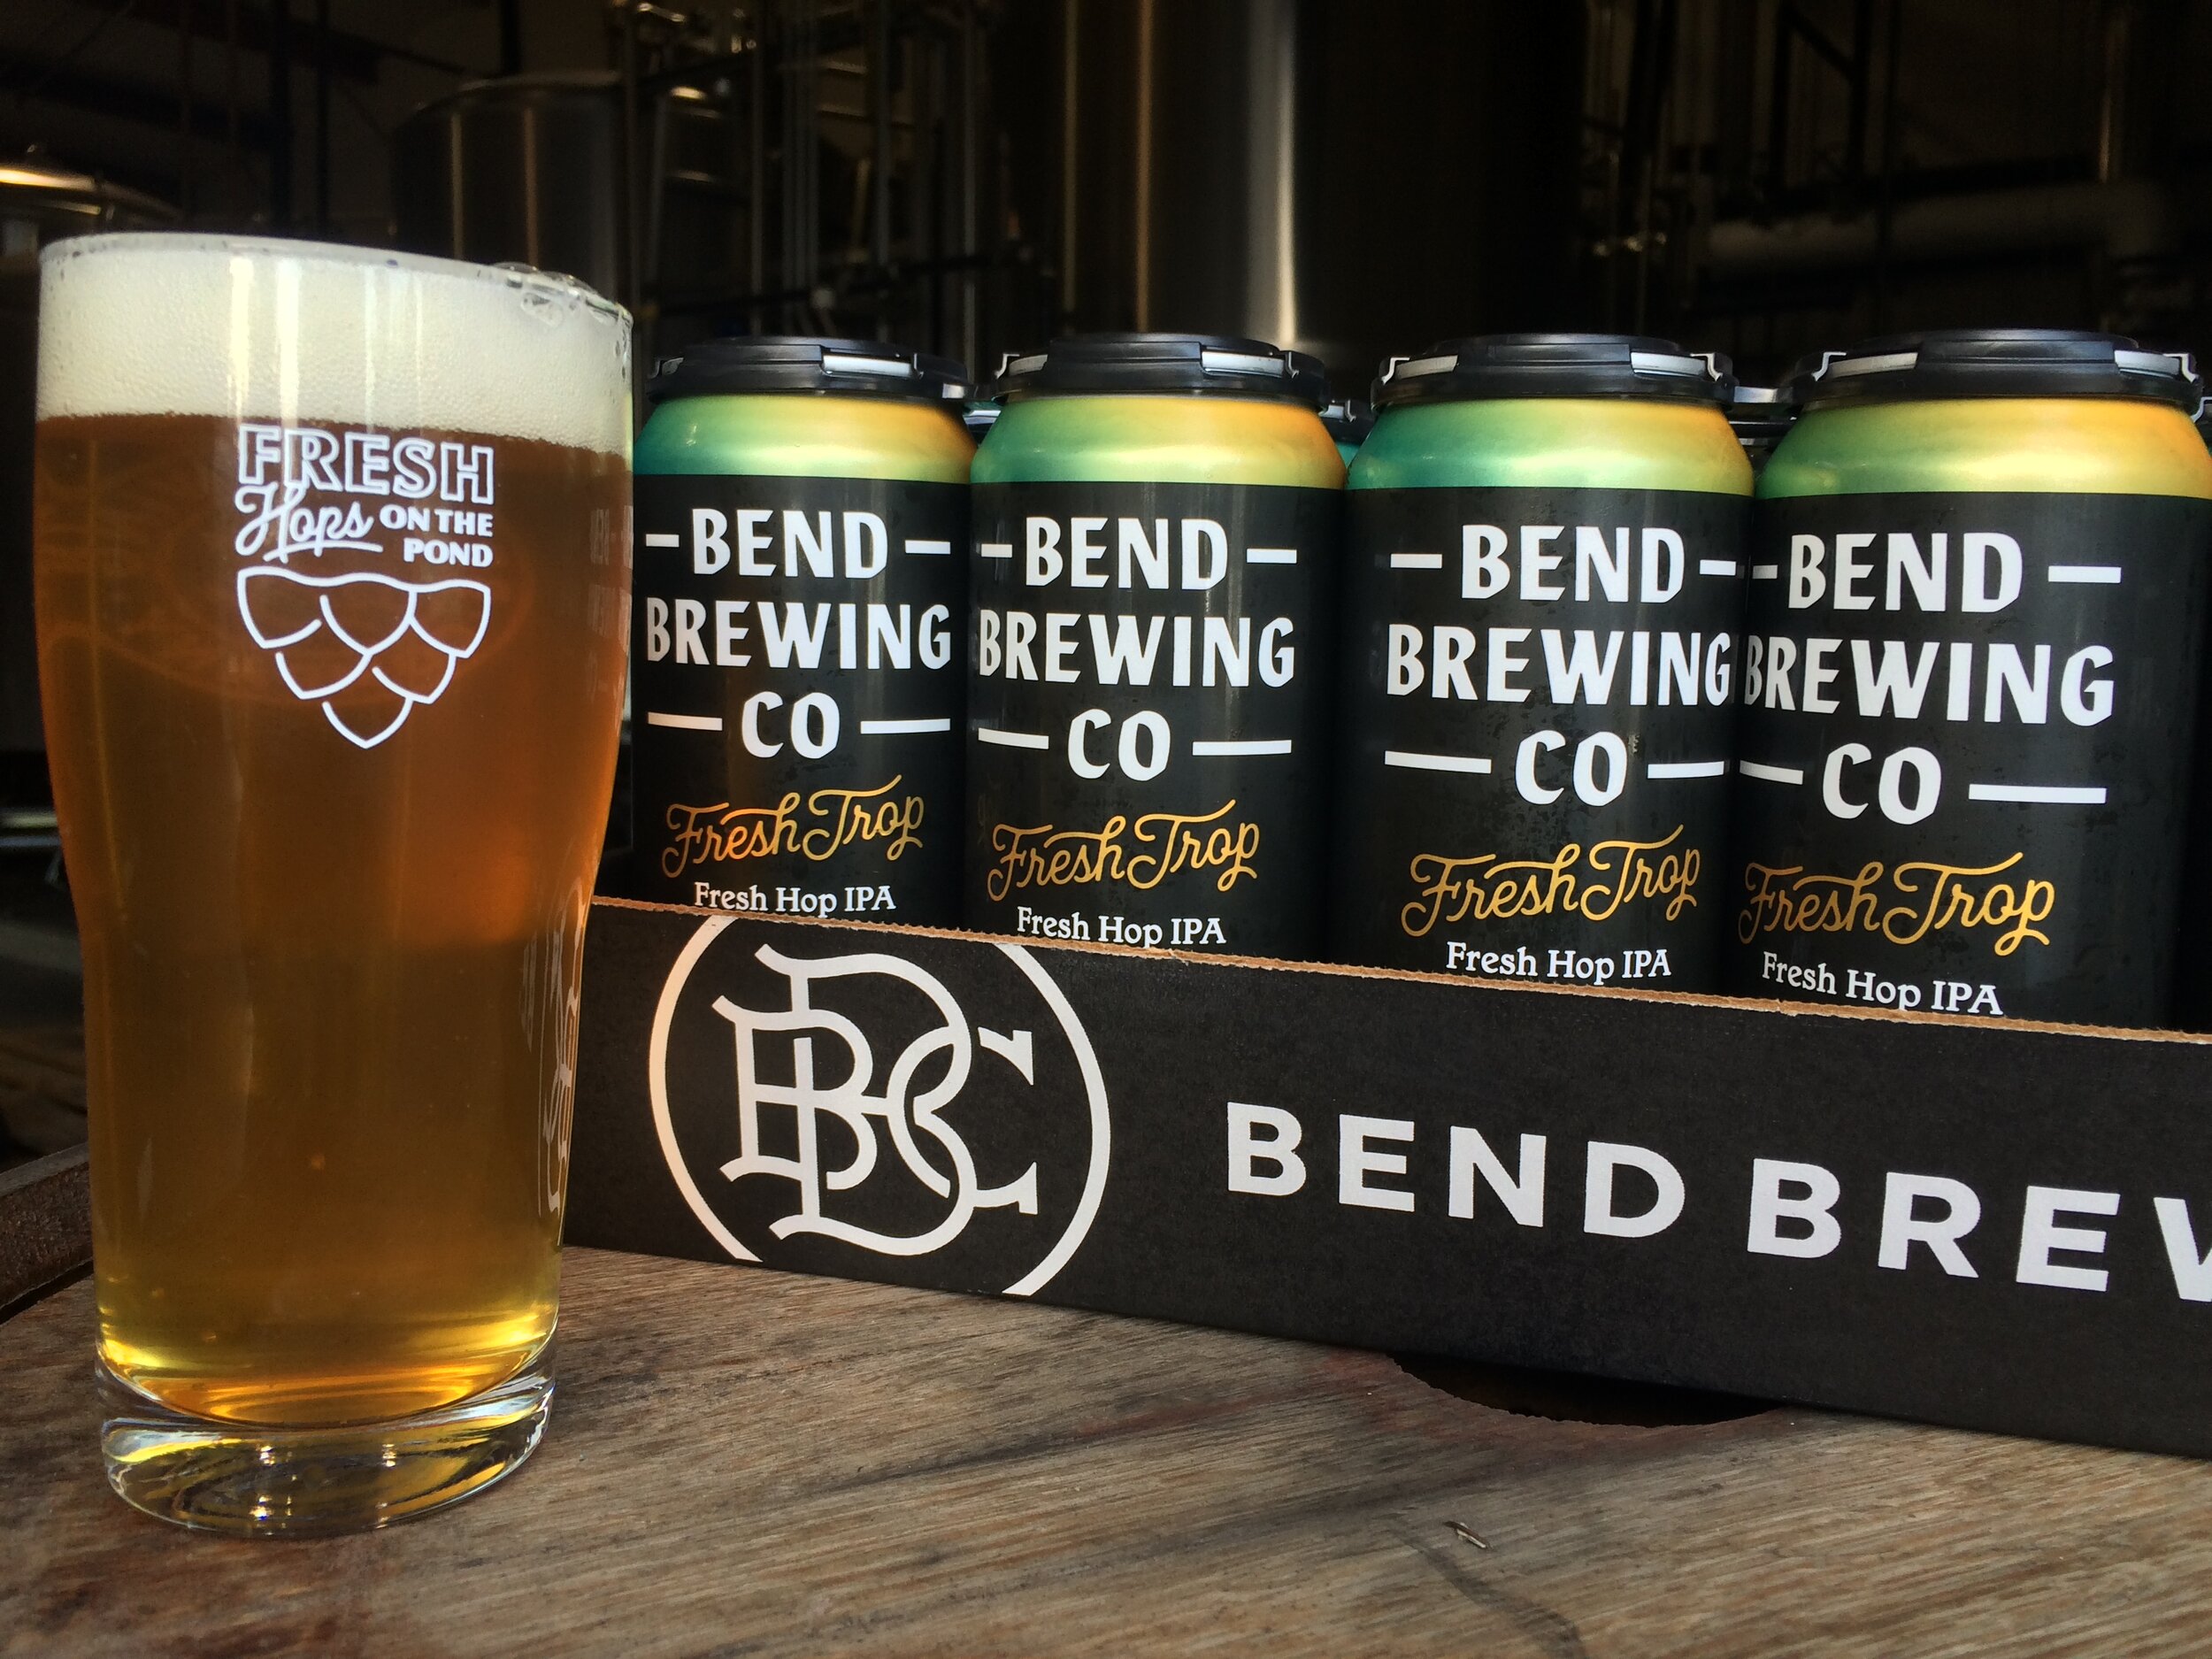 image courtesy Bend Brewing Company